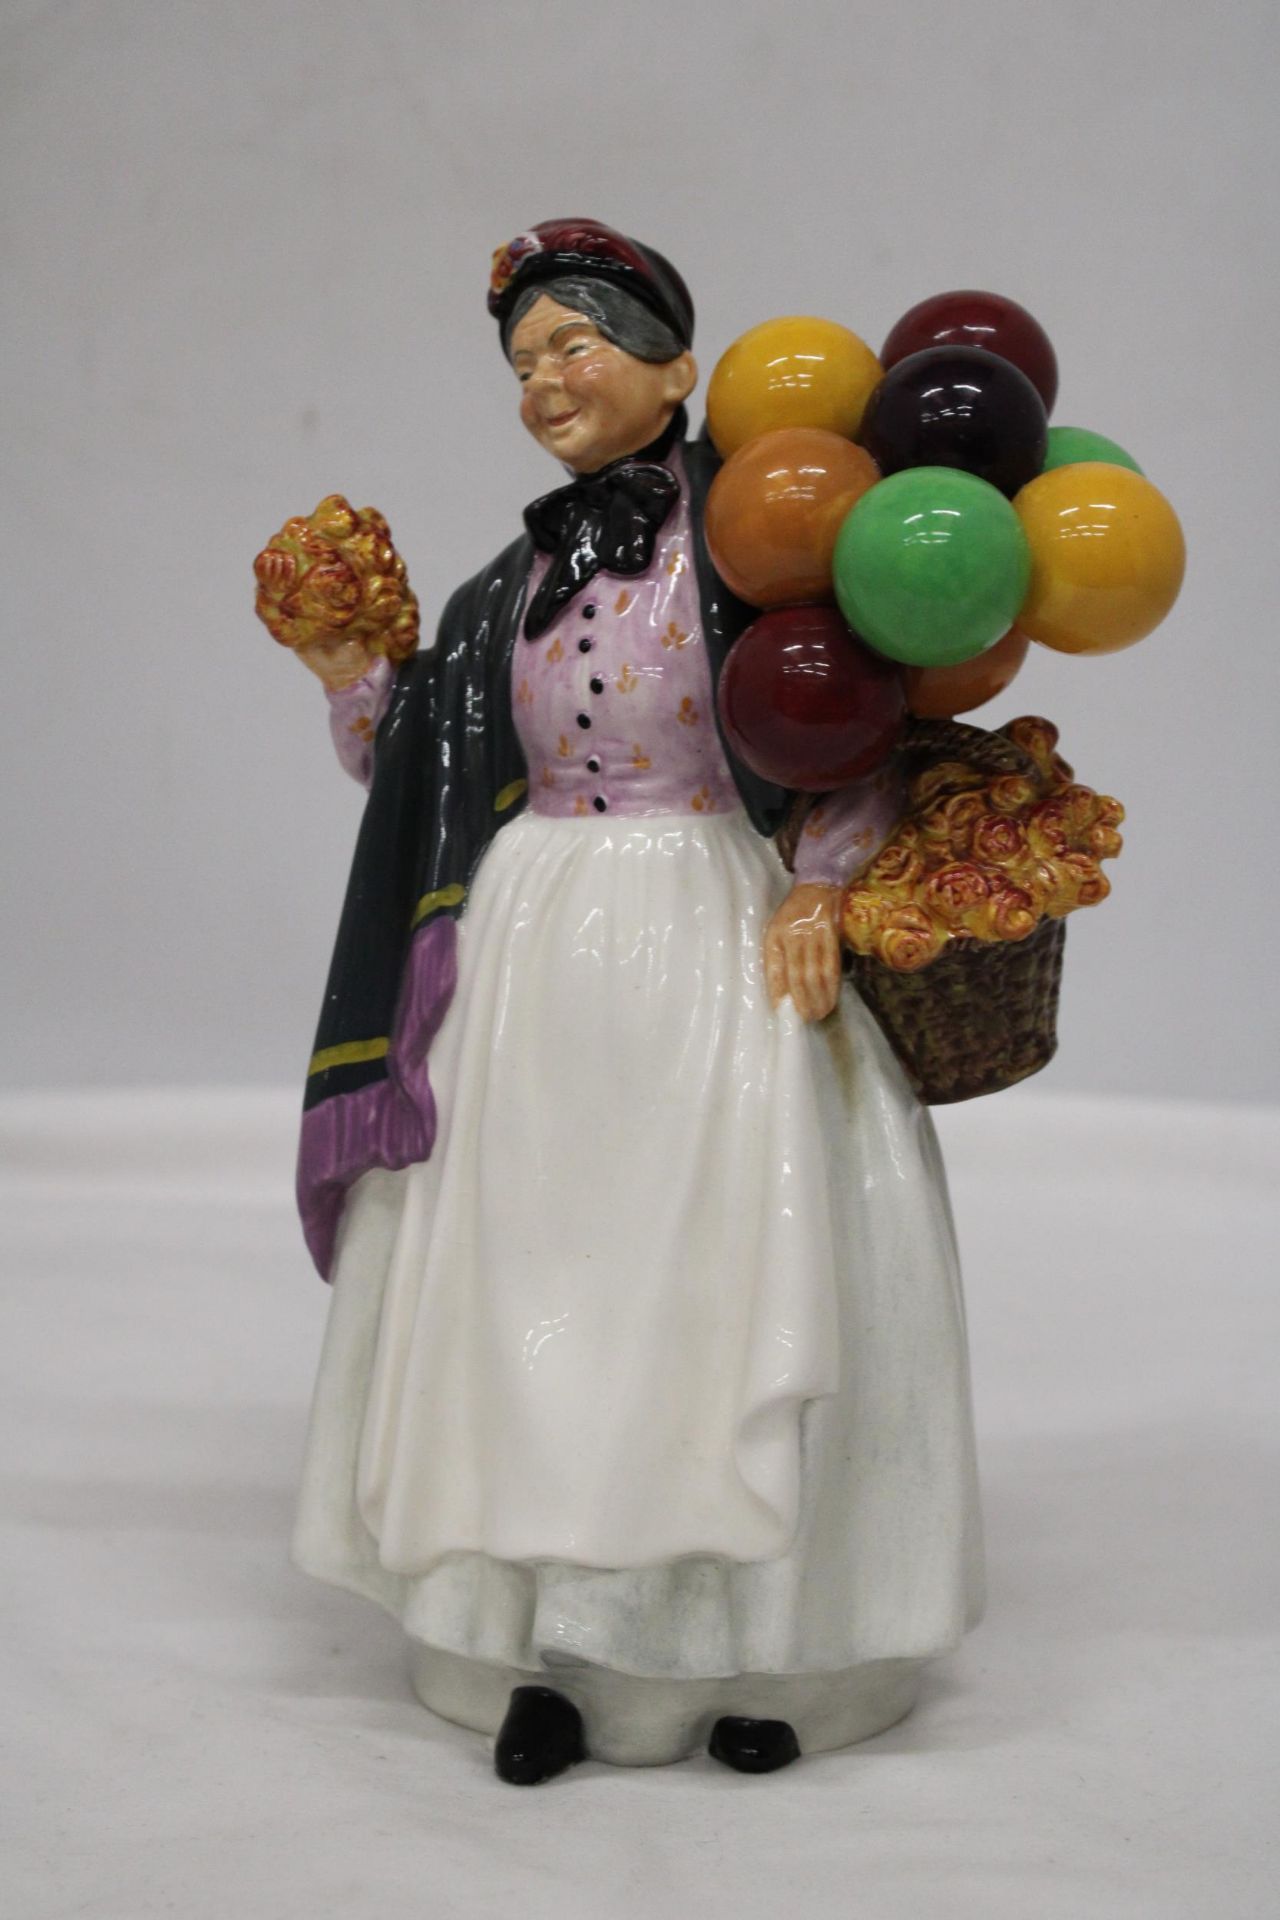 A ROYAL DOULTON FIGURE " BIDDY PENNY FARTHING" HN 1843 - Image 2 of 6